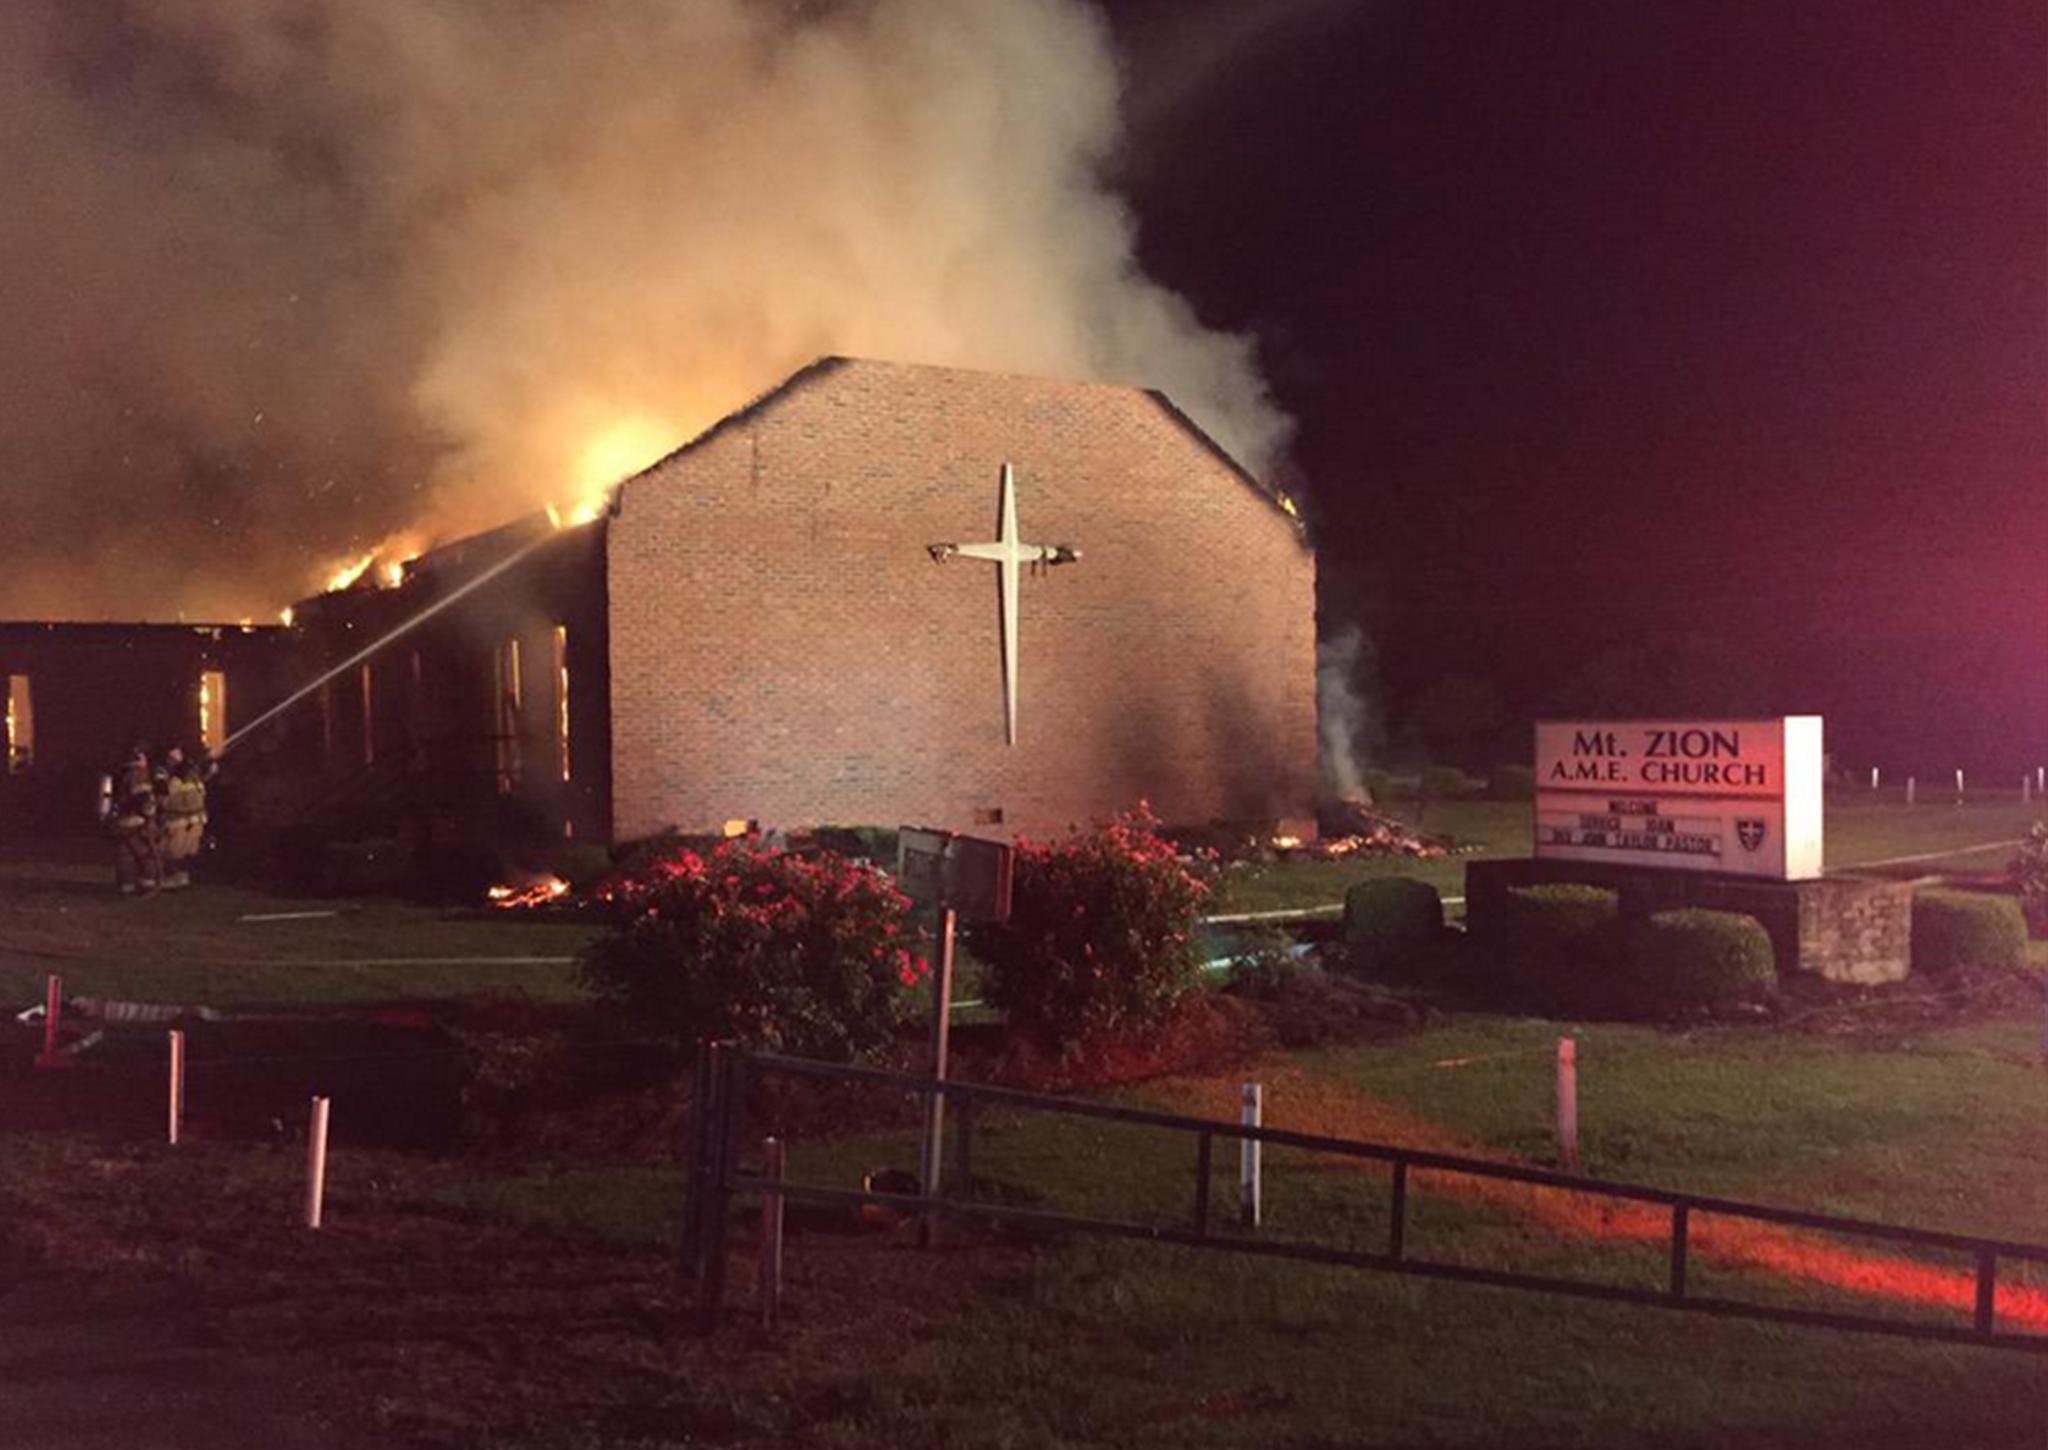 A church in South Carolina burns after a fire breaks out on June 30, 2015